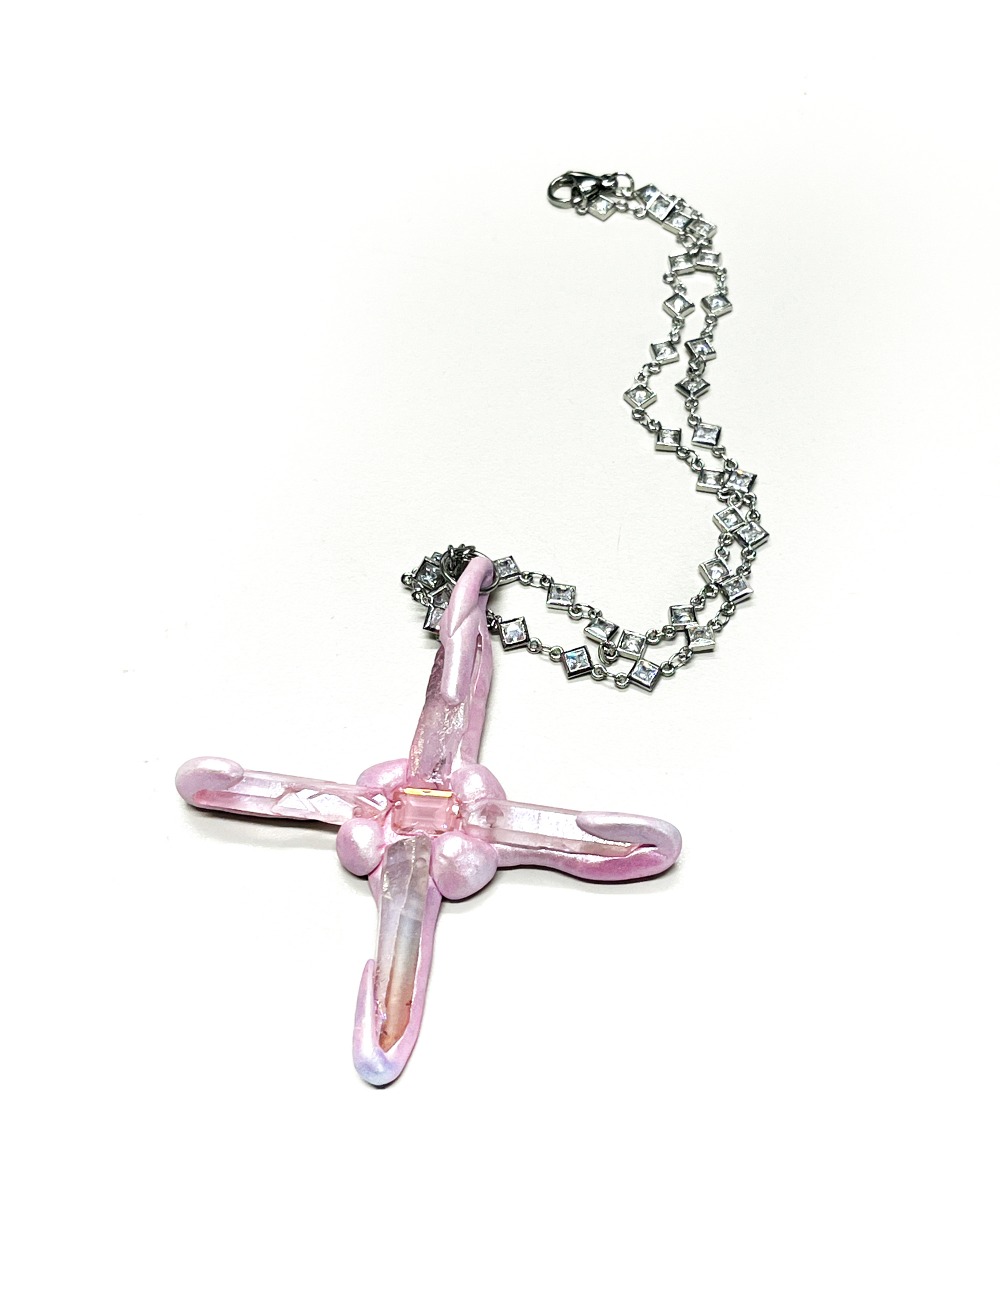 AMULET ON CHAIN_PINK